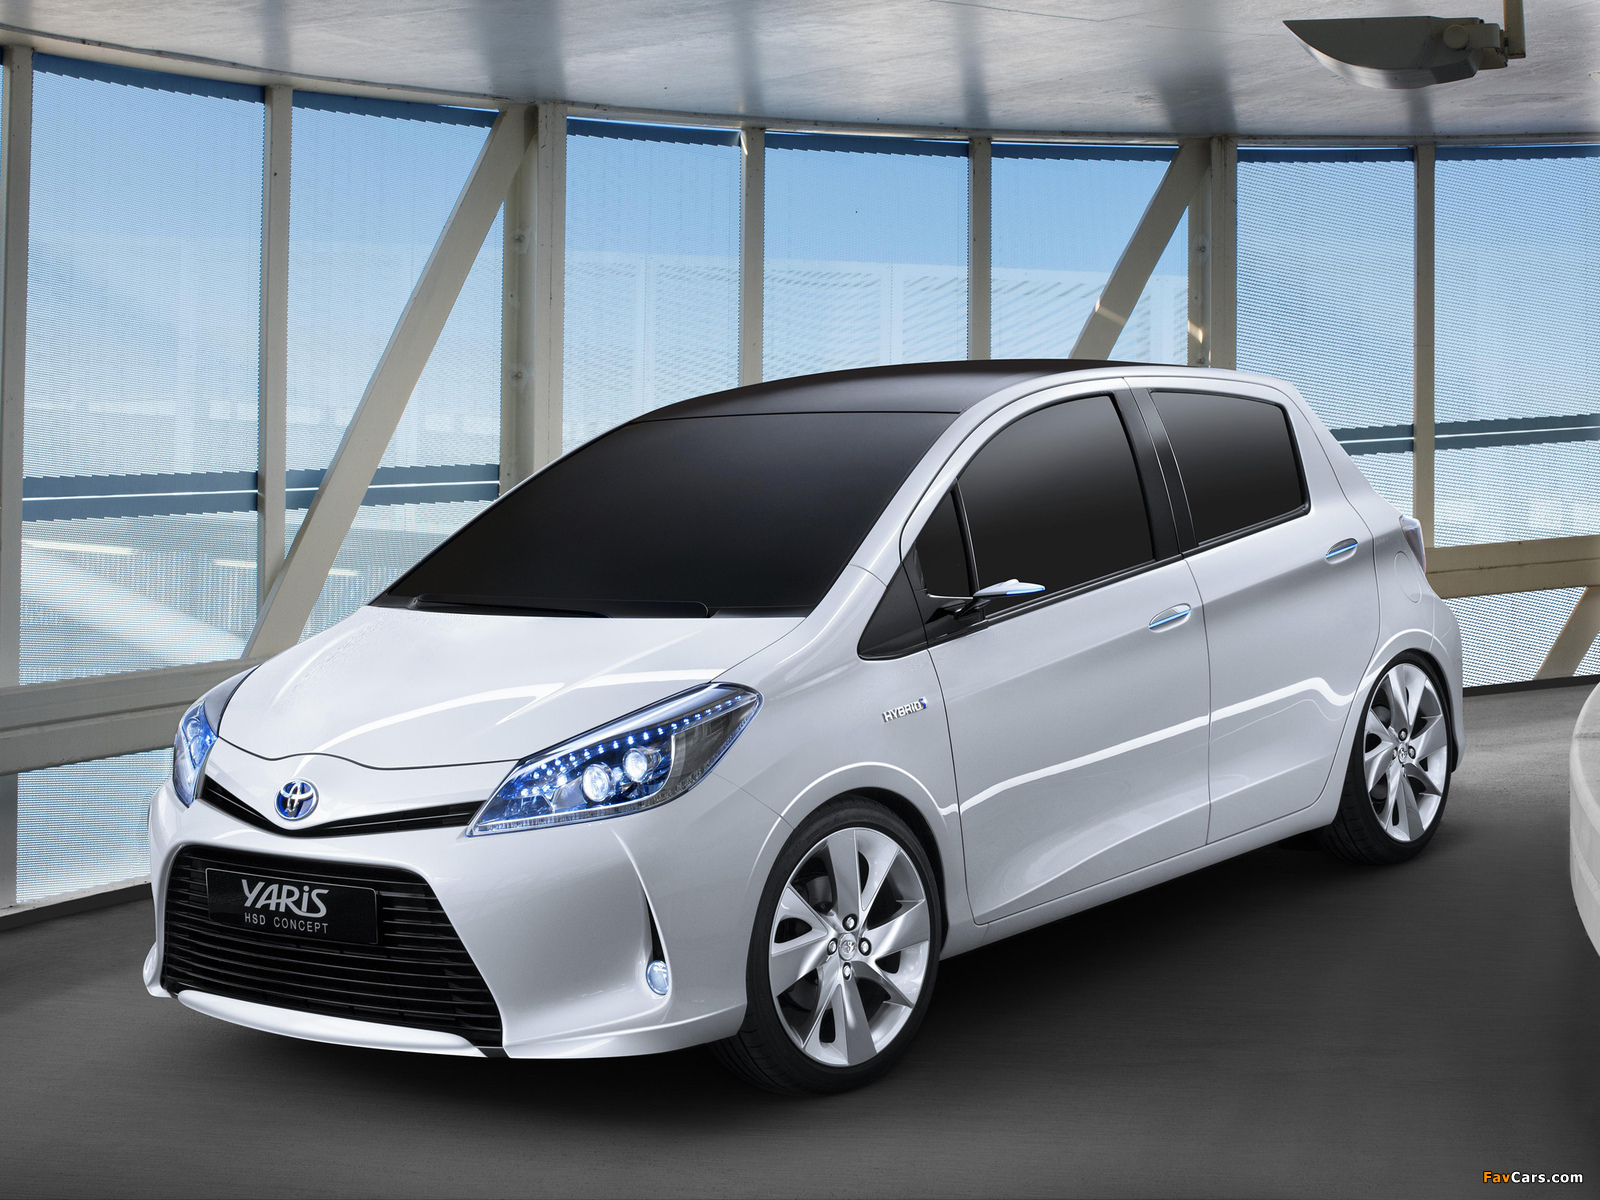 Toyota Yaris HSD Concept 2011 wallpapers (1600 x 1200)